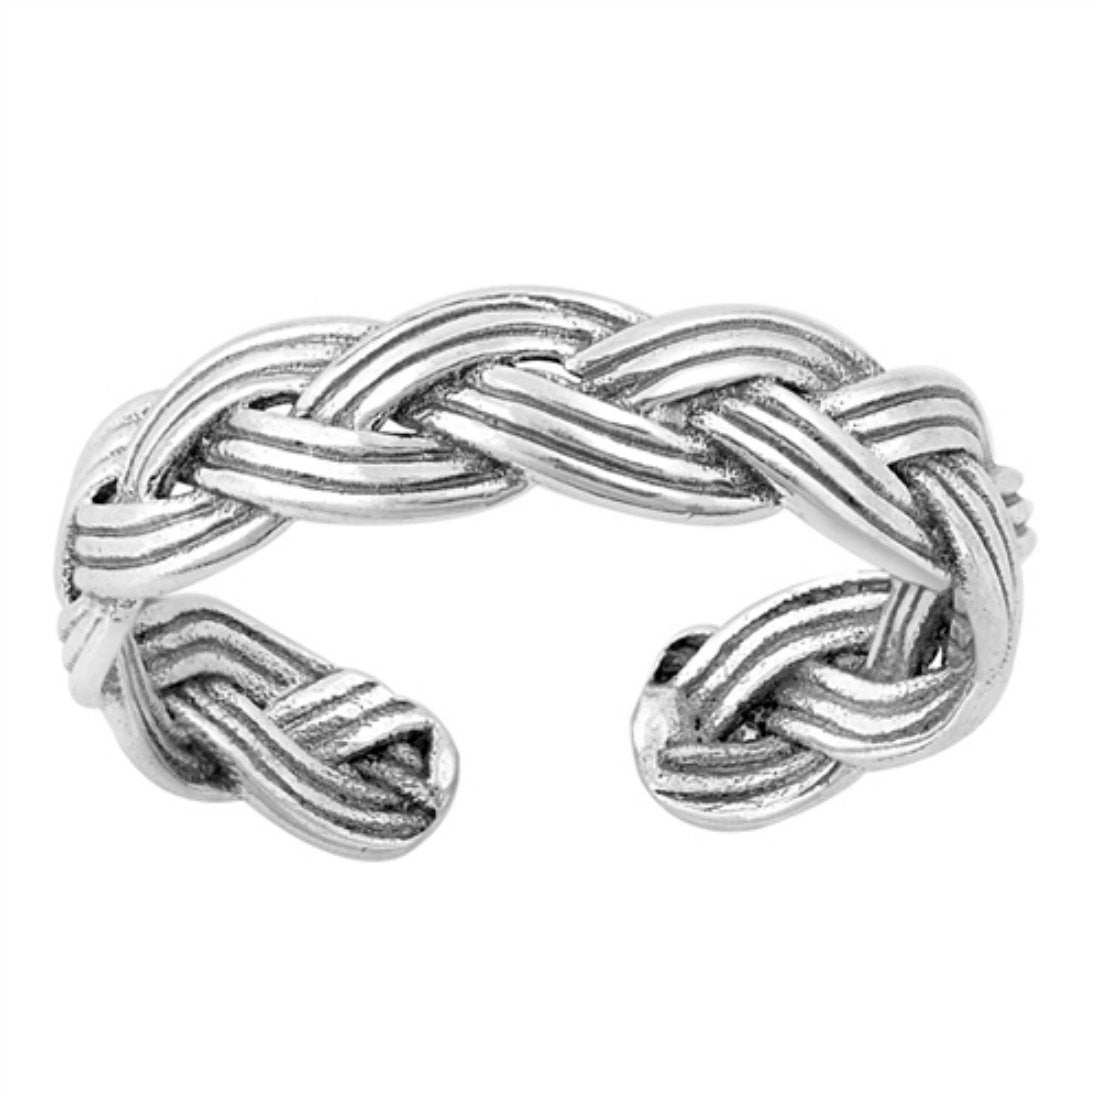 Toe Ring Braided Twisted Rope Silver Toe Ring Adjustable Plain Simple Solid 925 Sterling Silver 5mm cirsscross